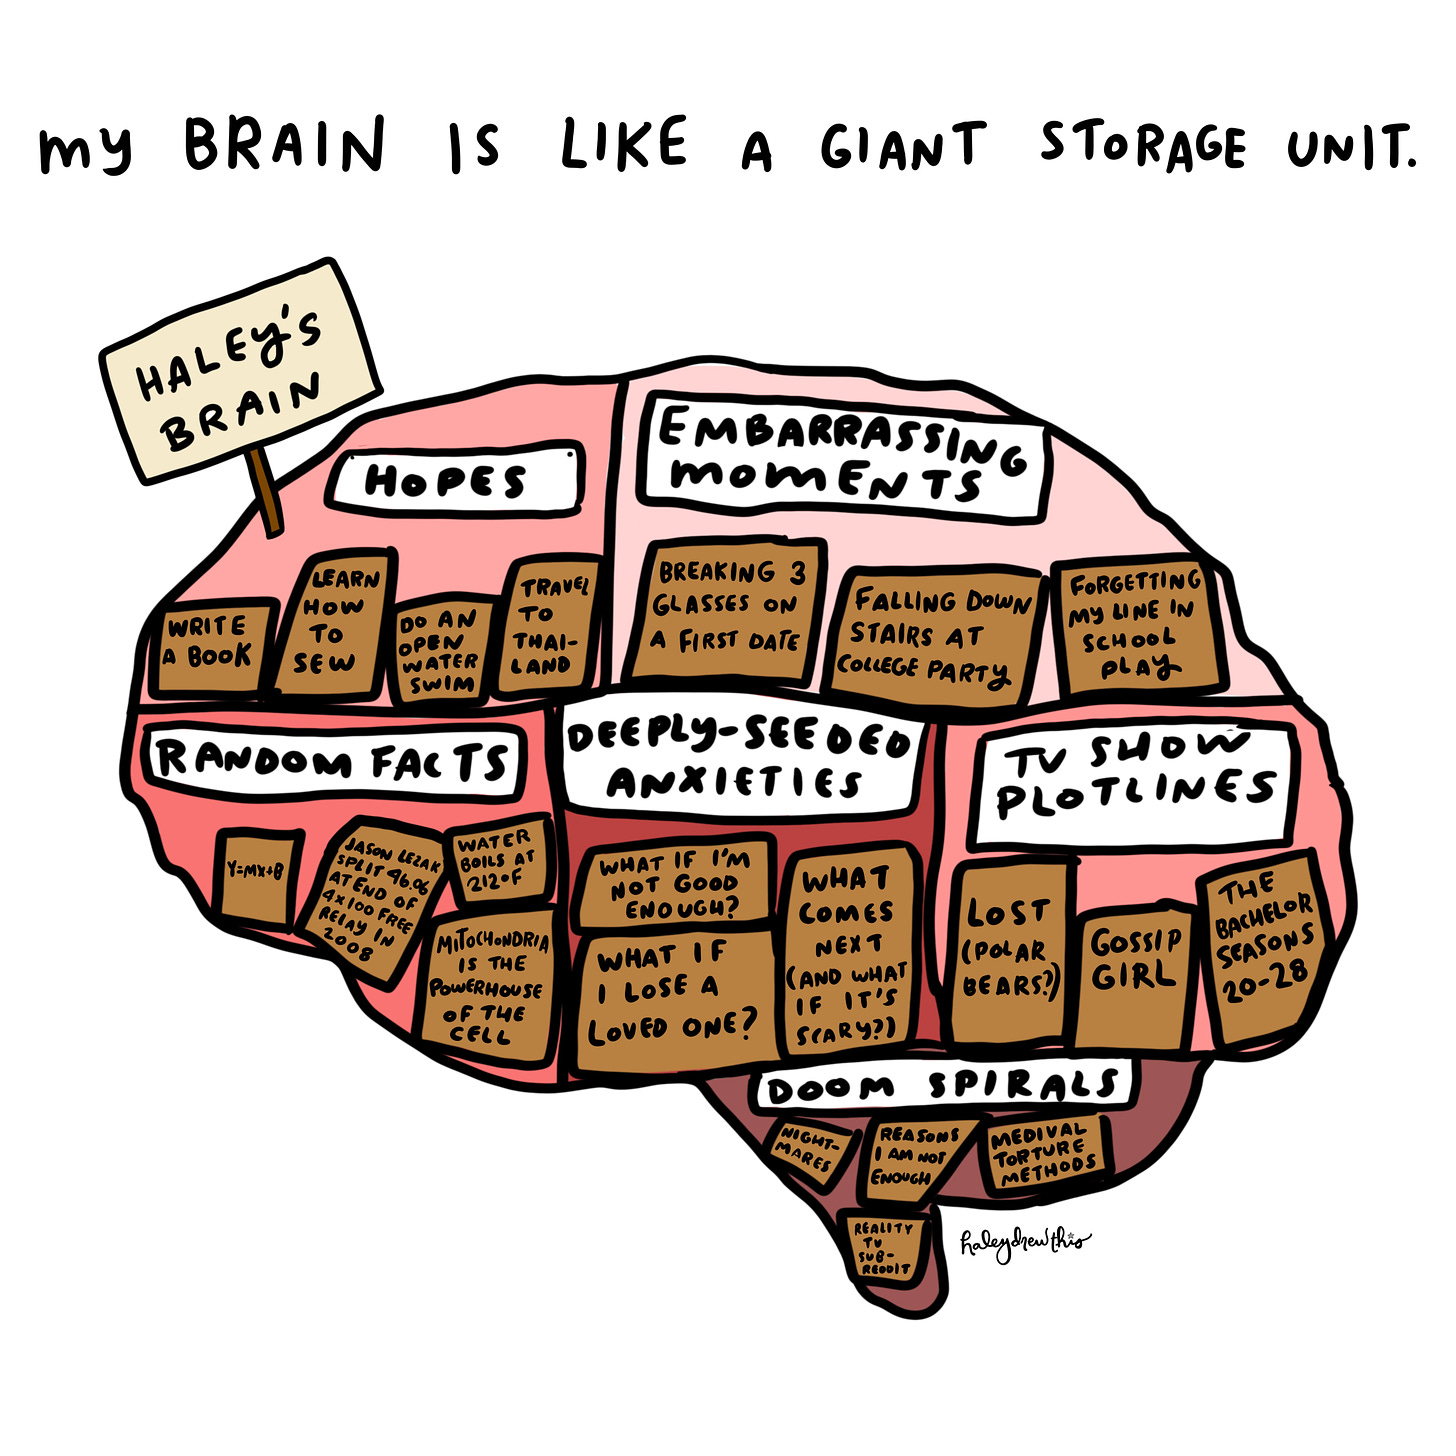 My brain is like a giant storage unit Inside of brain, guide to interior with comments like “section for embarrassing thoughts” / “plotlines from Lost” / “big fears” / “random facts” - mitochondria, etc.    